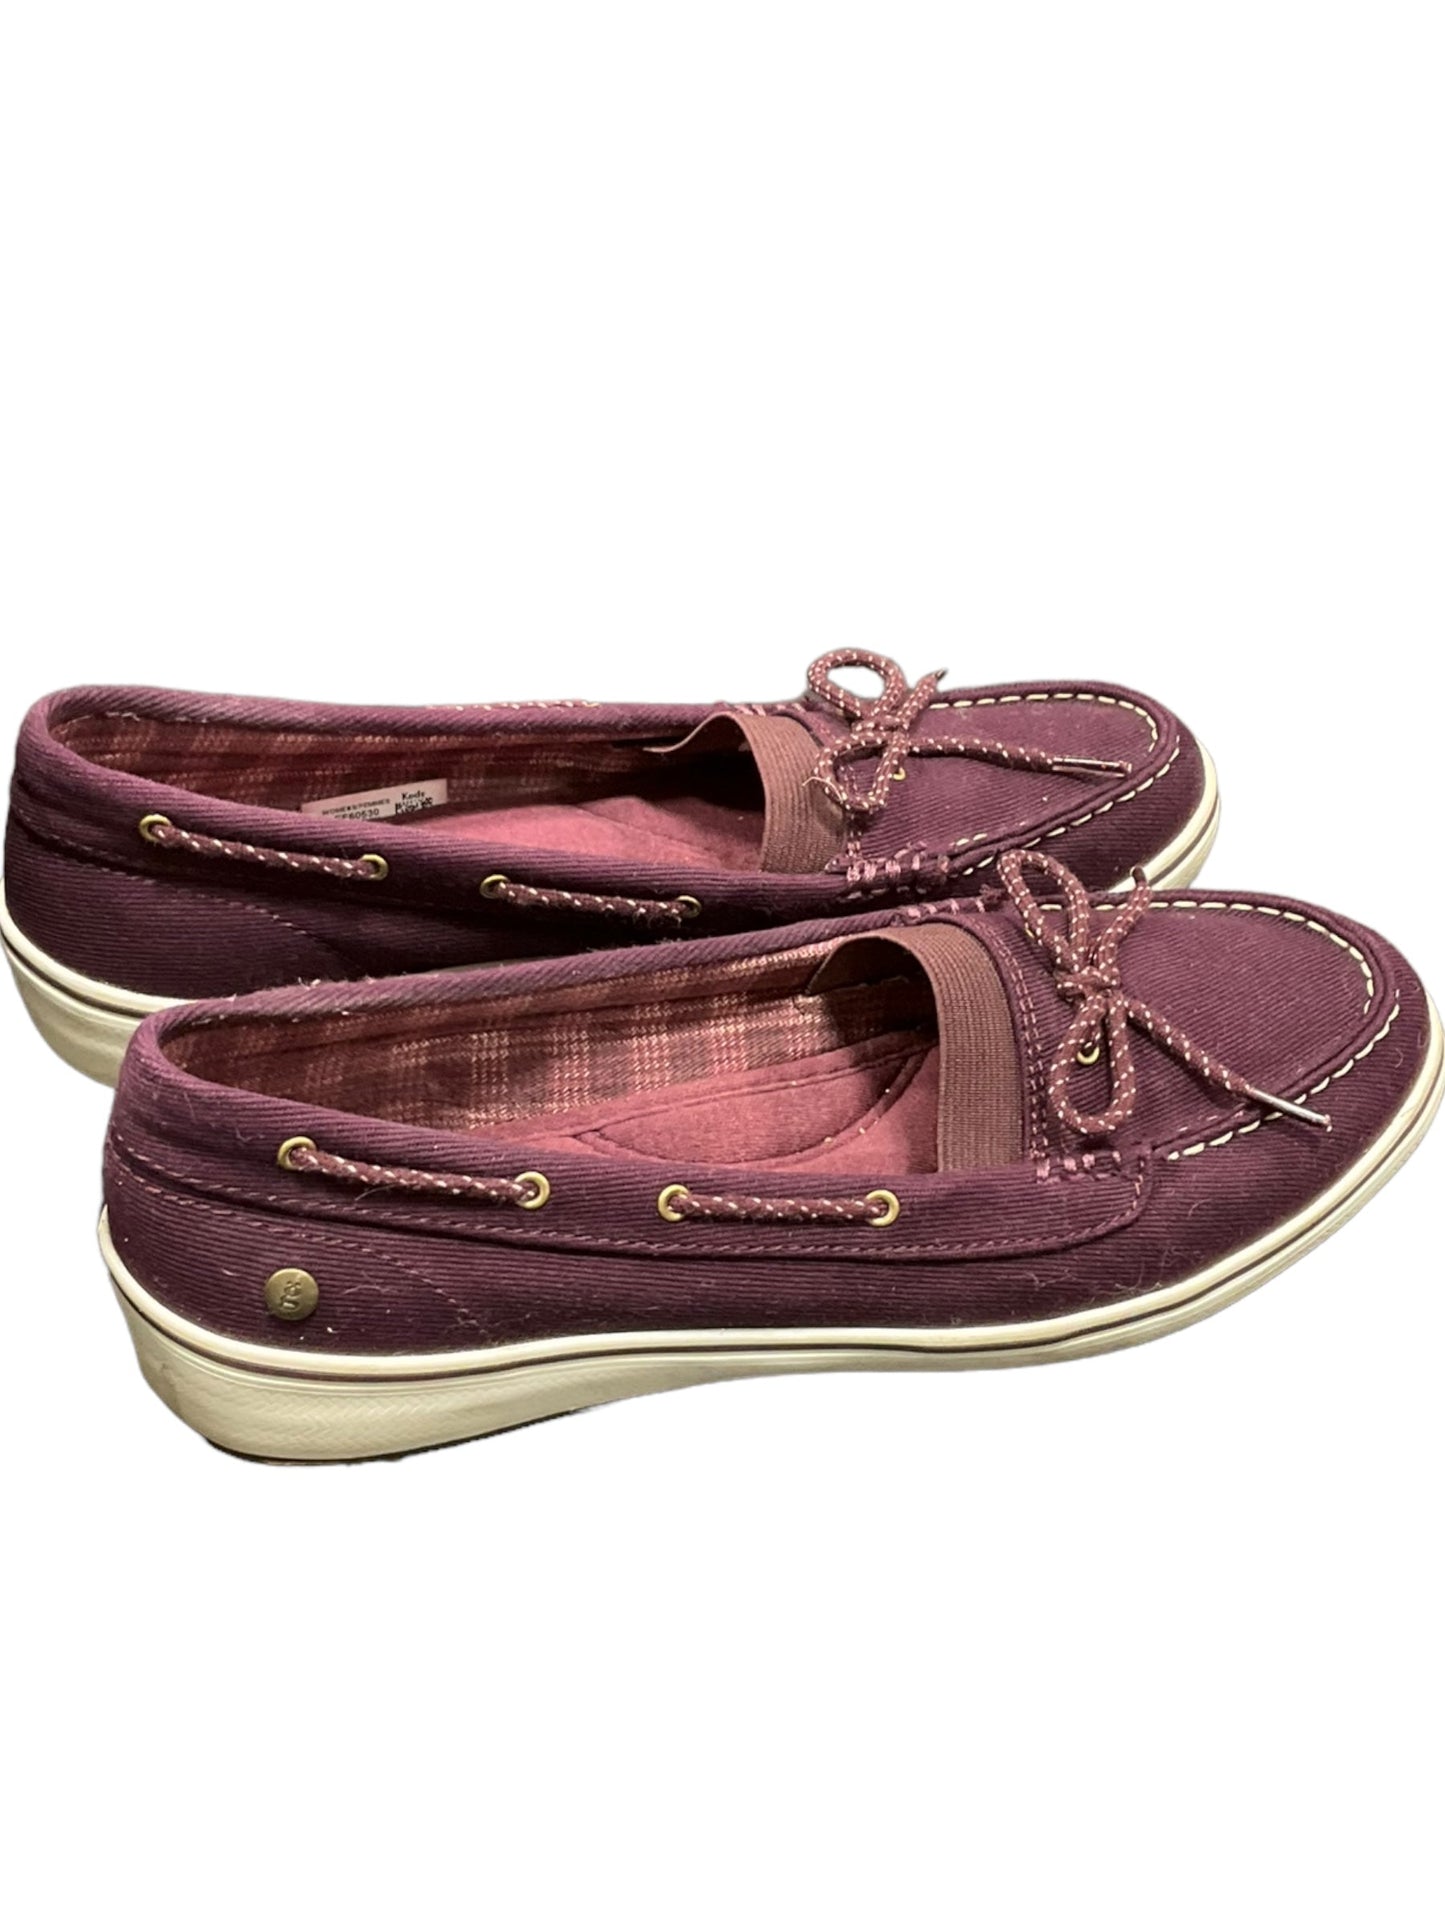 Shoes Flats By Grasshoppers  Size: 7